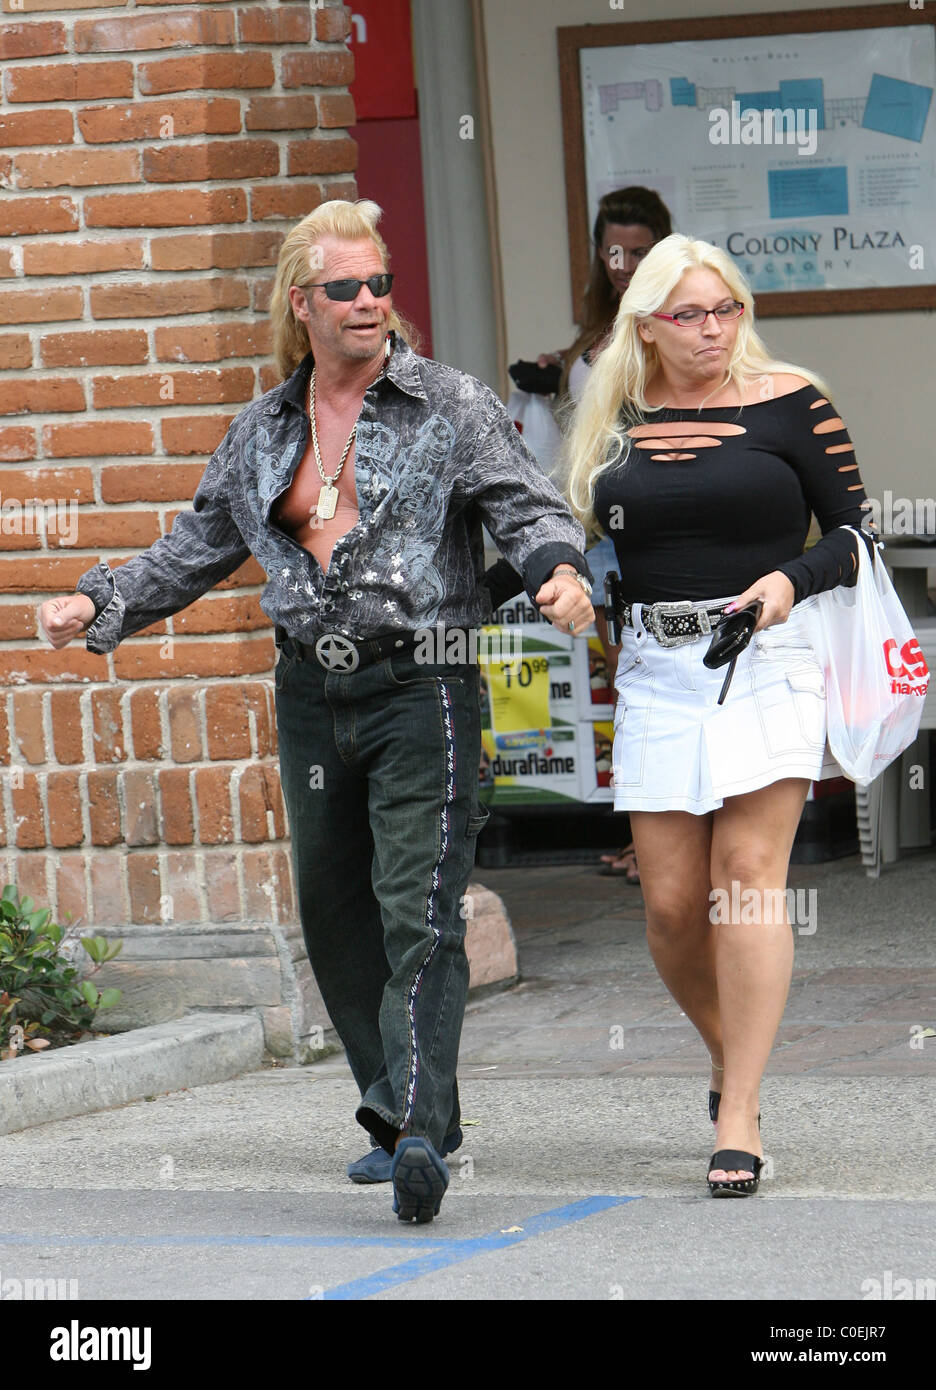 Duane Chapman aka 'Dog' the bounty hunter and his wife Beth Smith spend the afternoon together shopping Malibu, California - Stock Photo